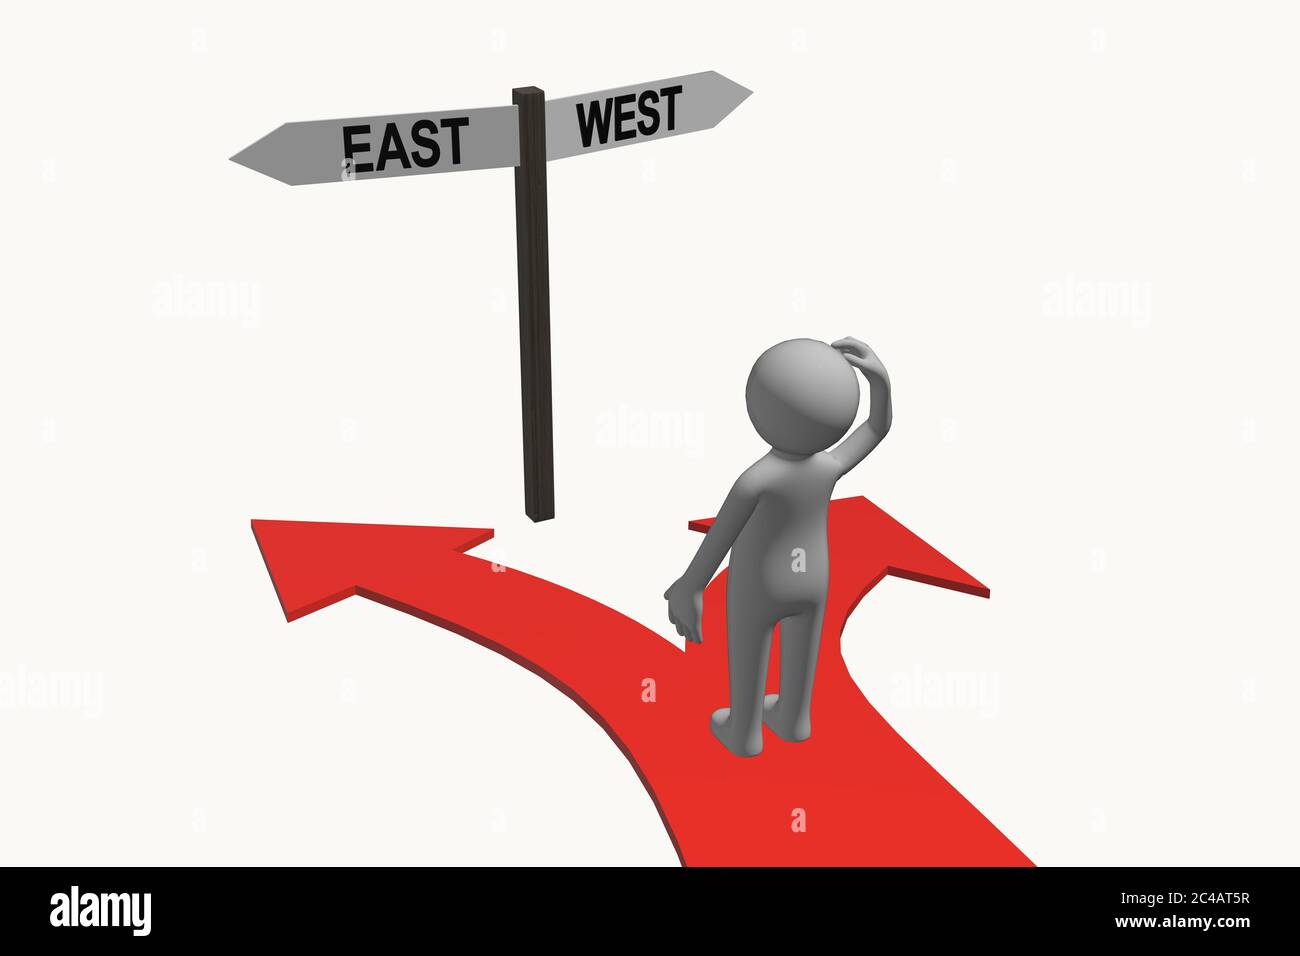 Anonymous 3D character standing at a crossroads trying to make a decision / choice about east or west, choice / change / lack of direction concept Stock Photo